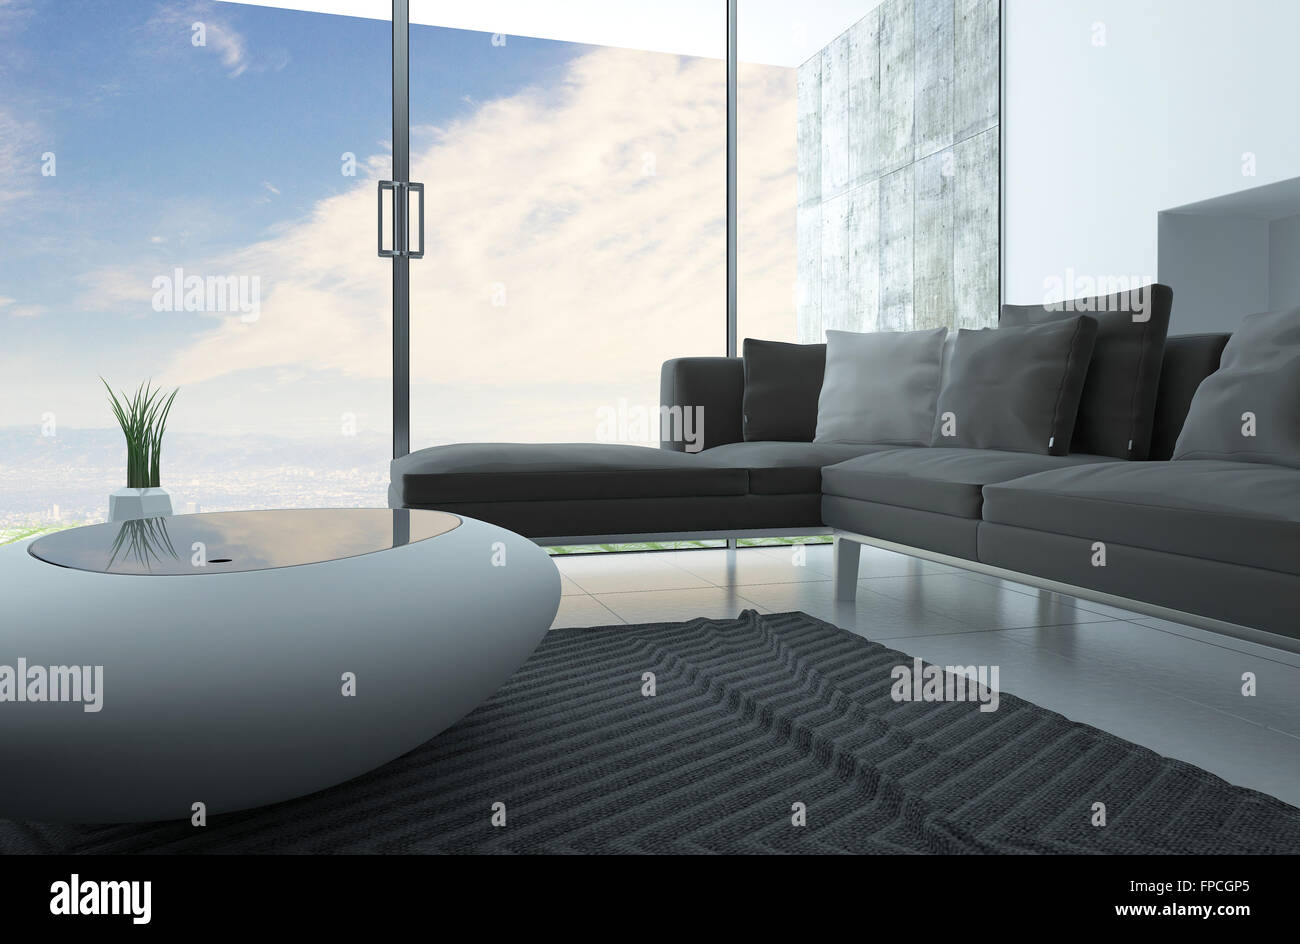 Modern Living Room Interior With A Trendy Funky Coffee Table